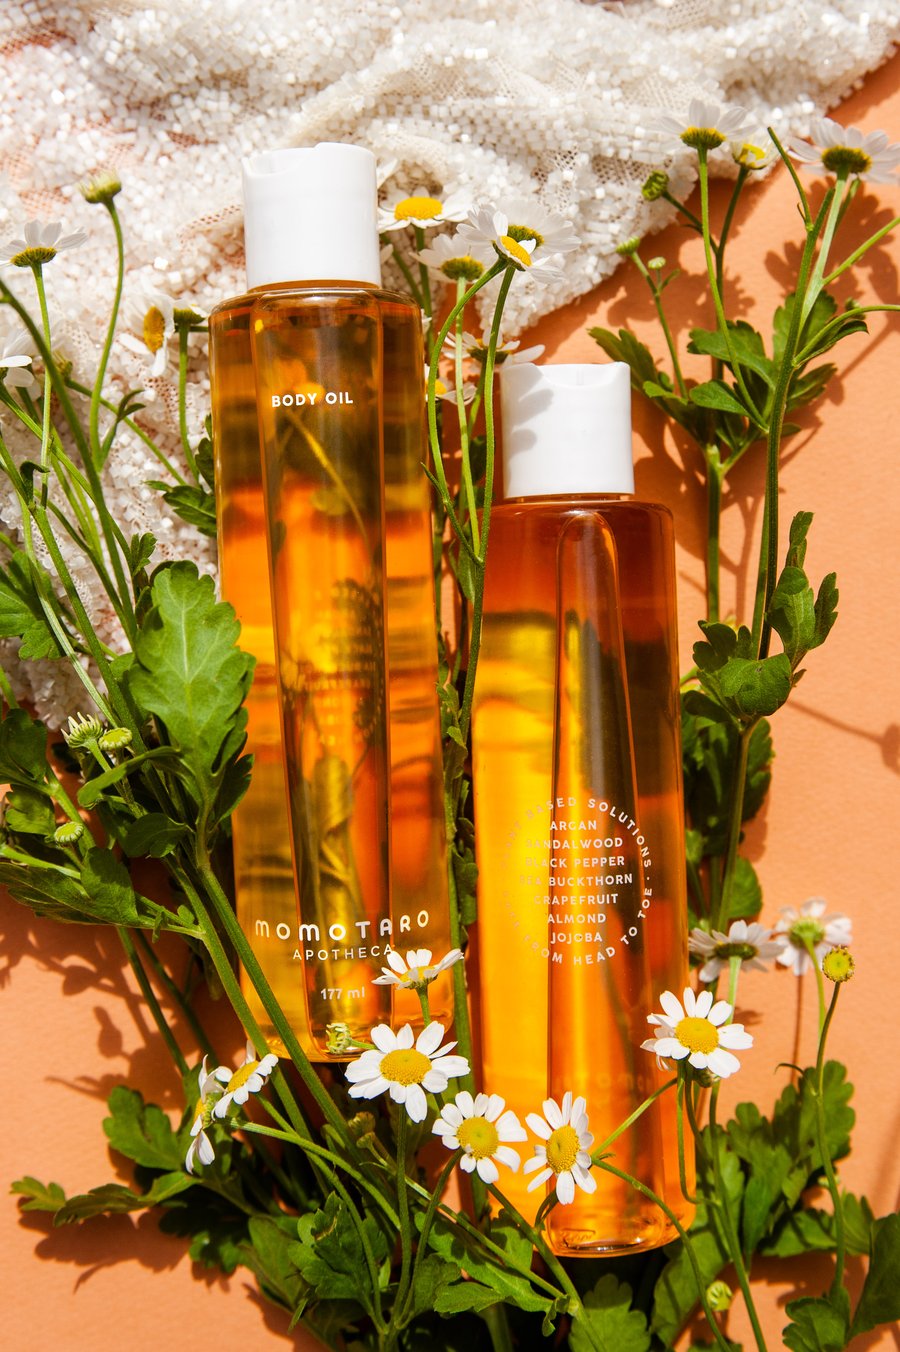 Two bottles of body oil with dandelions